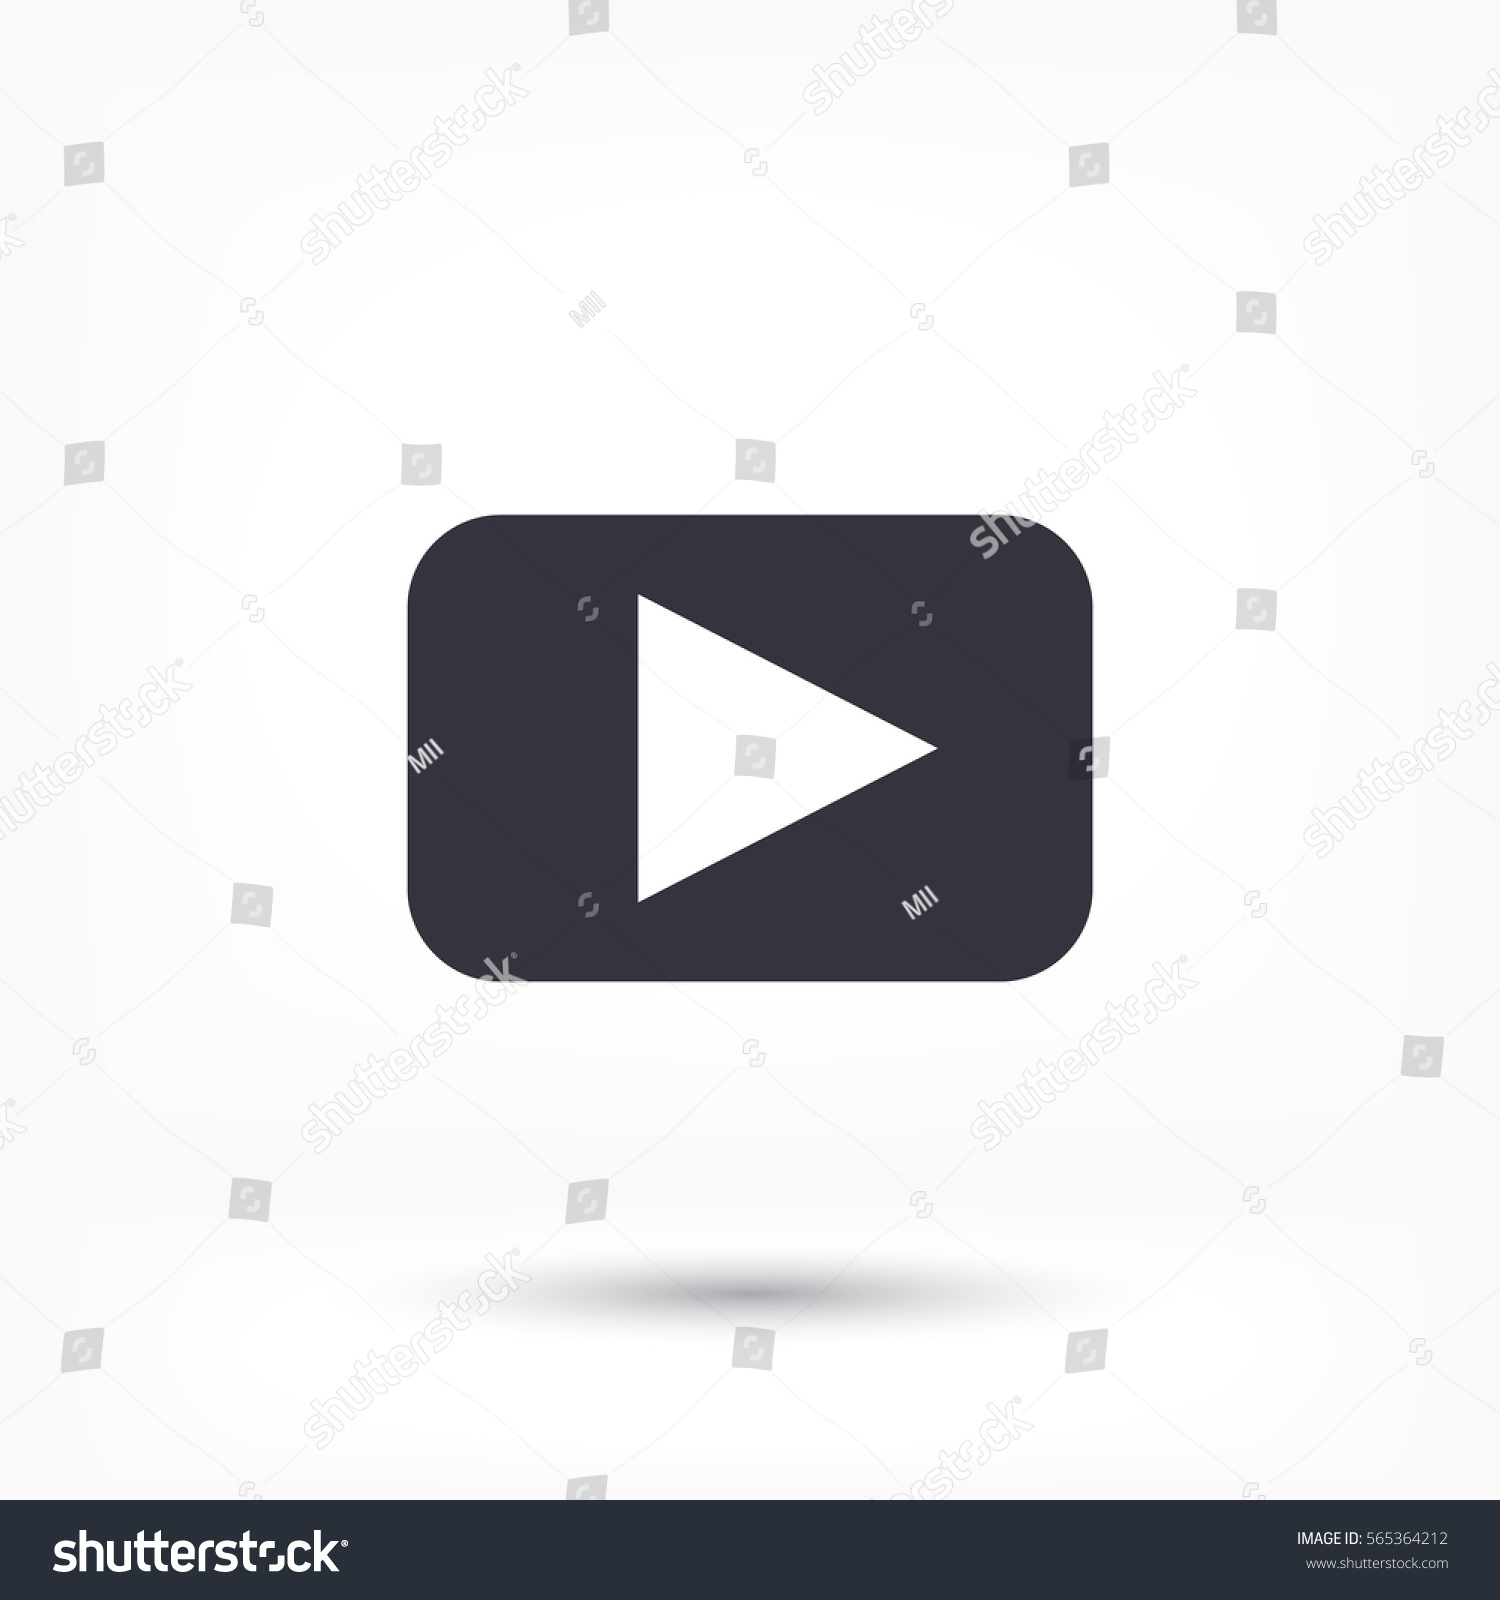 Video play button on phone screen - Free Tools and utensils icons